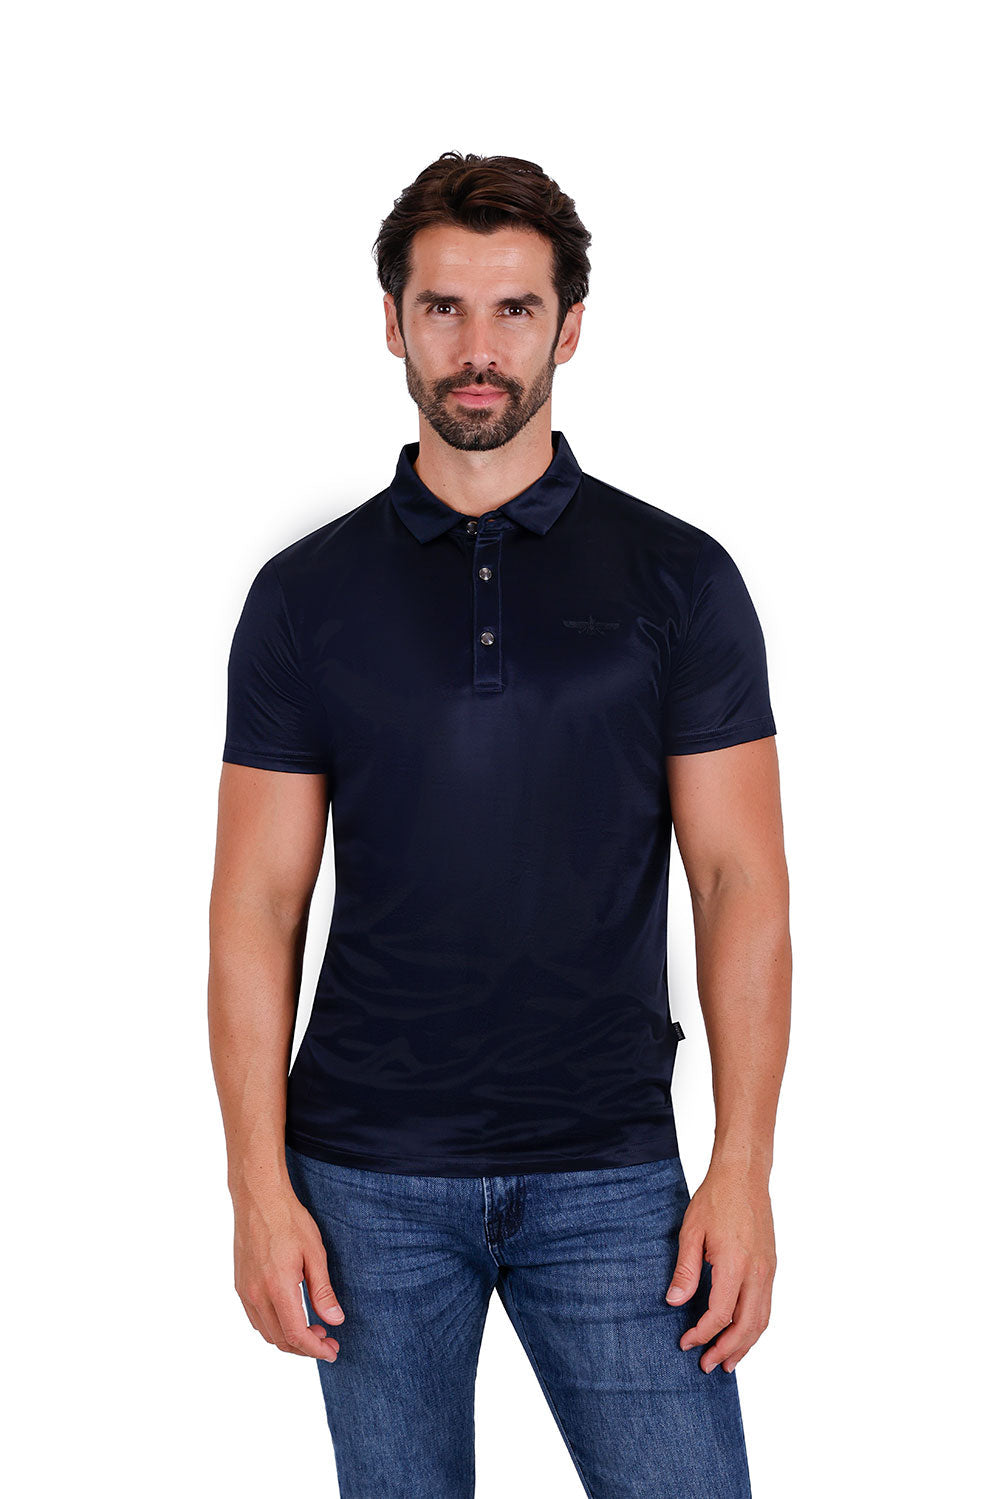 Men's solid color silky stretch polo short sleeve shirts 3P02 Navy